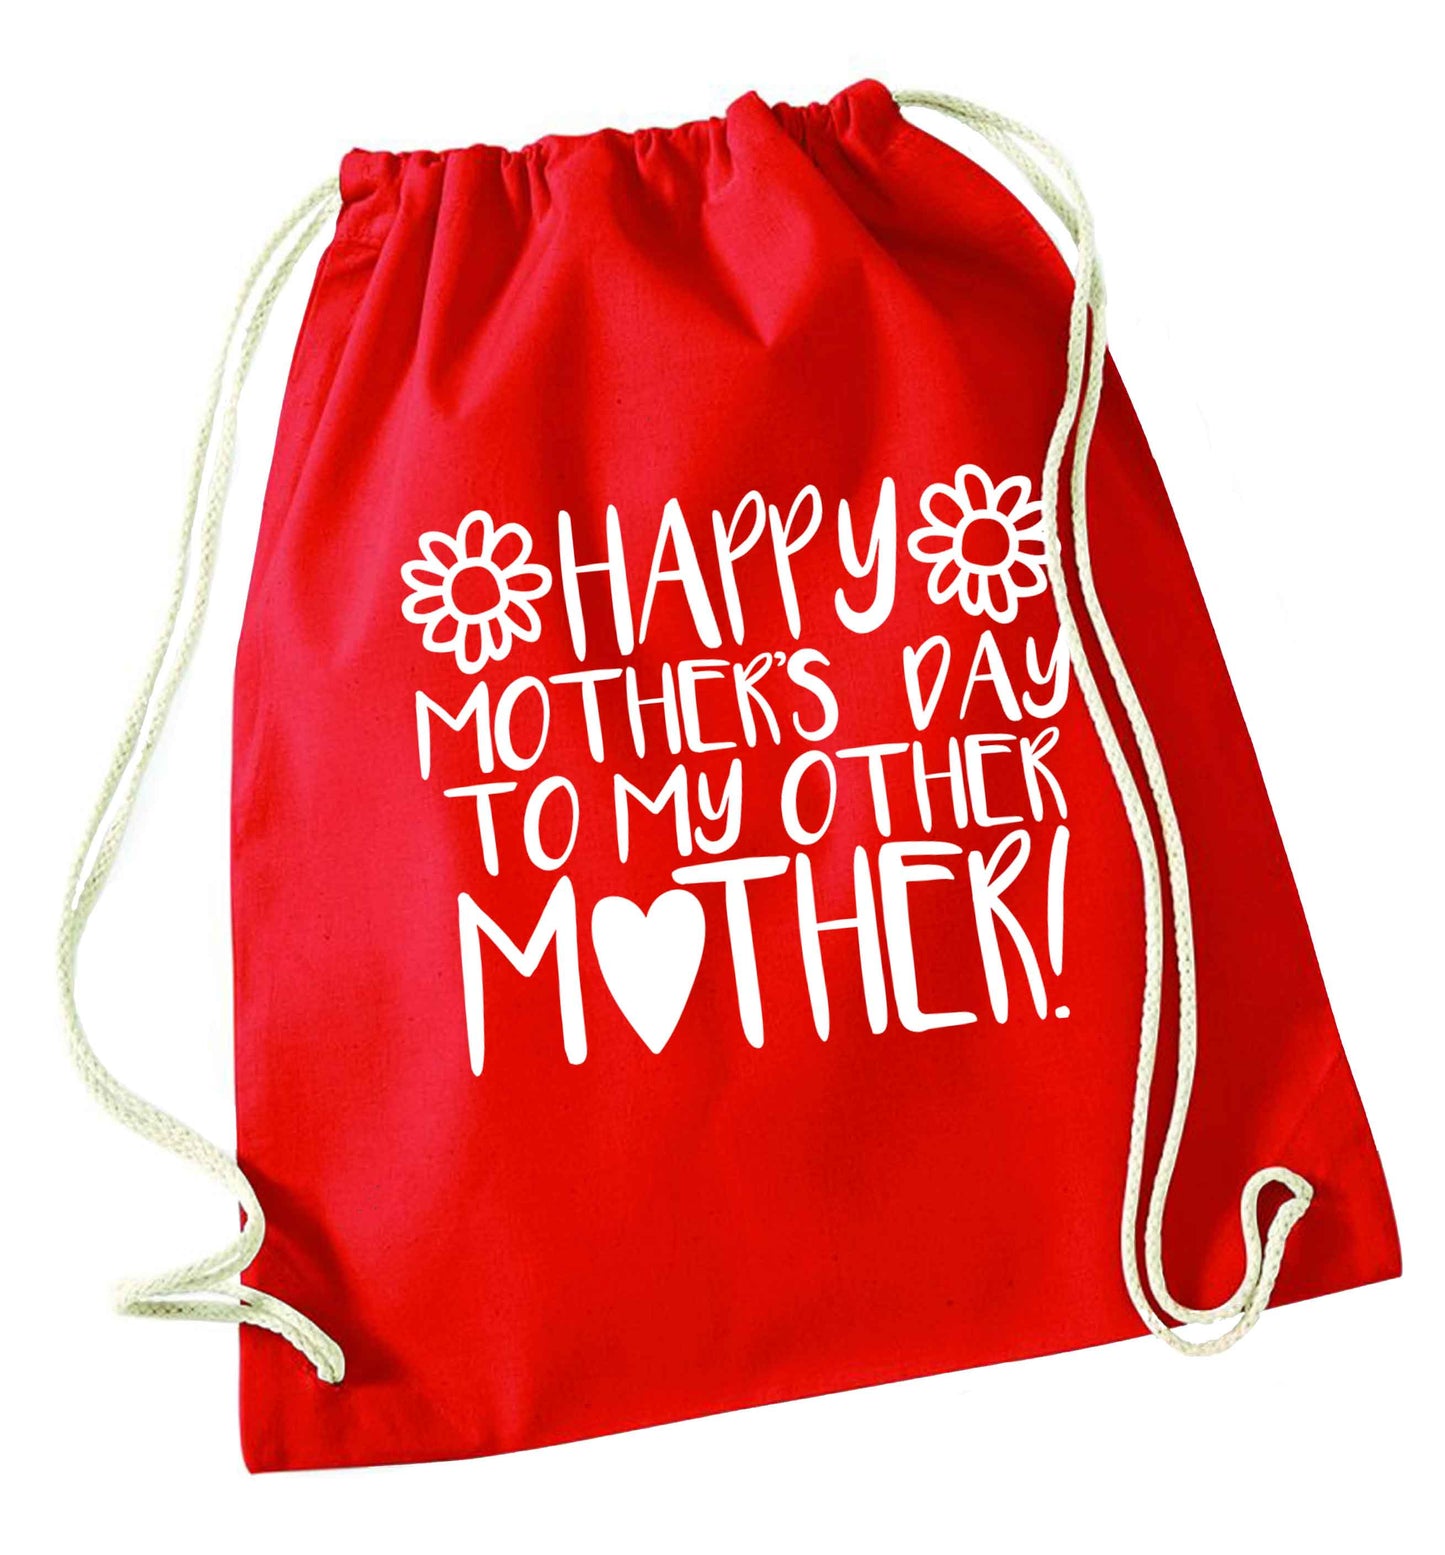 Happy mother's day to my other mother red drawstring bag 